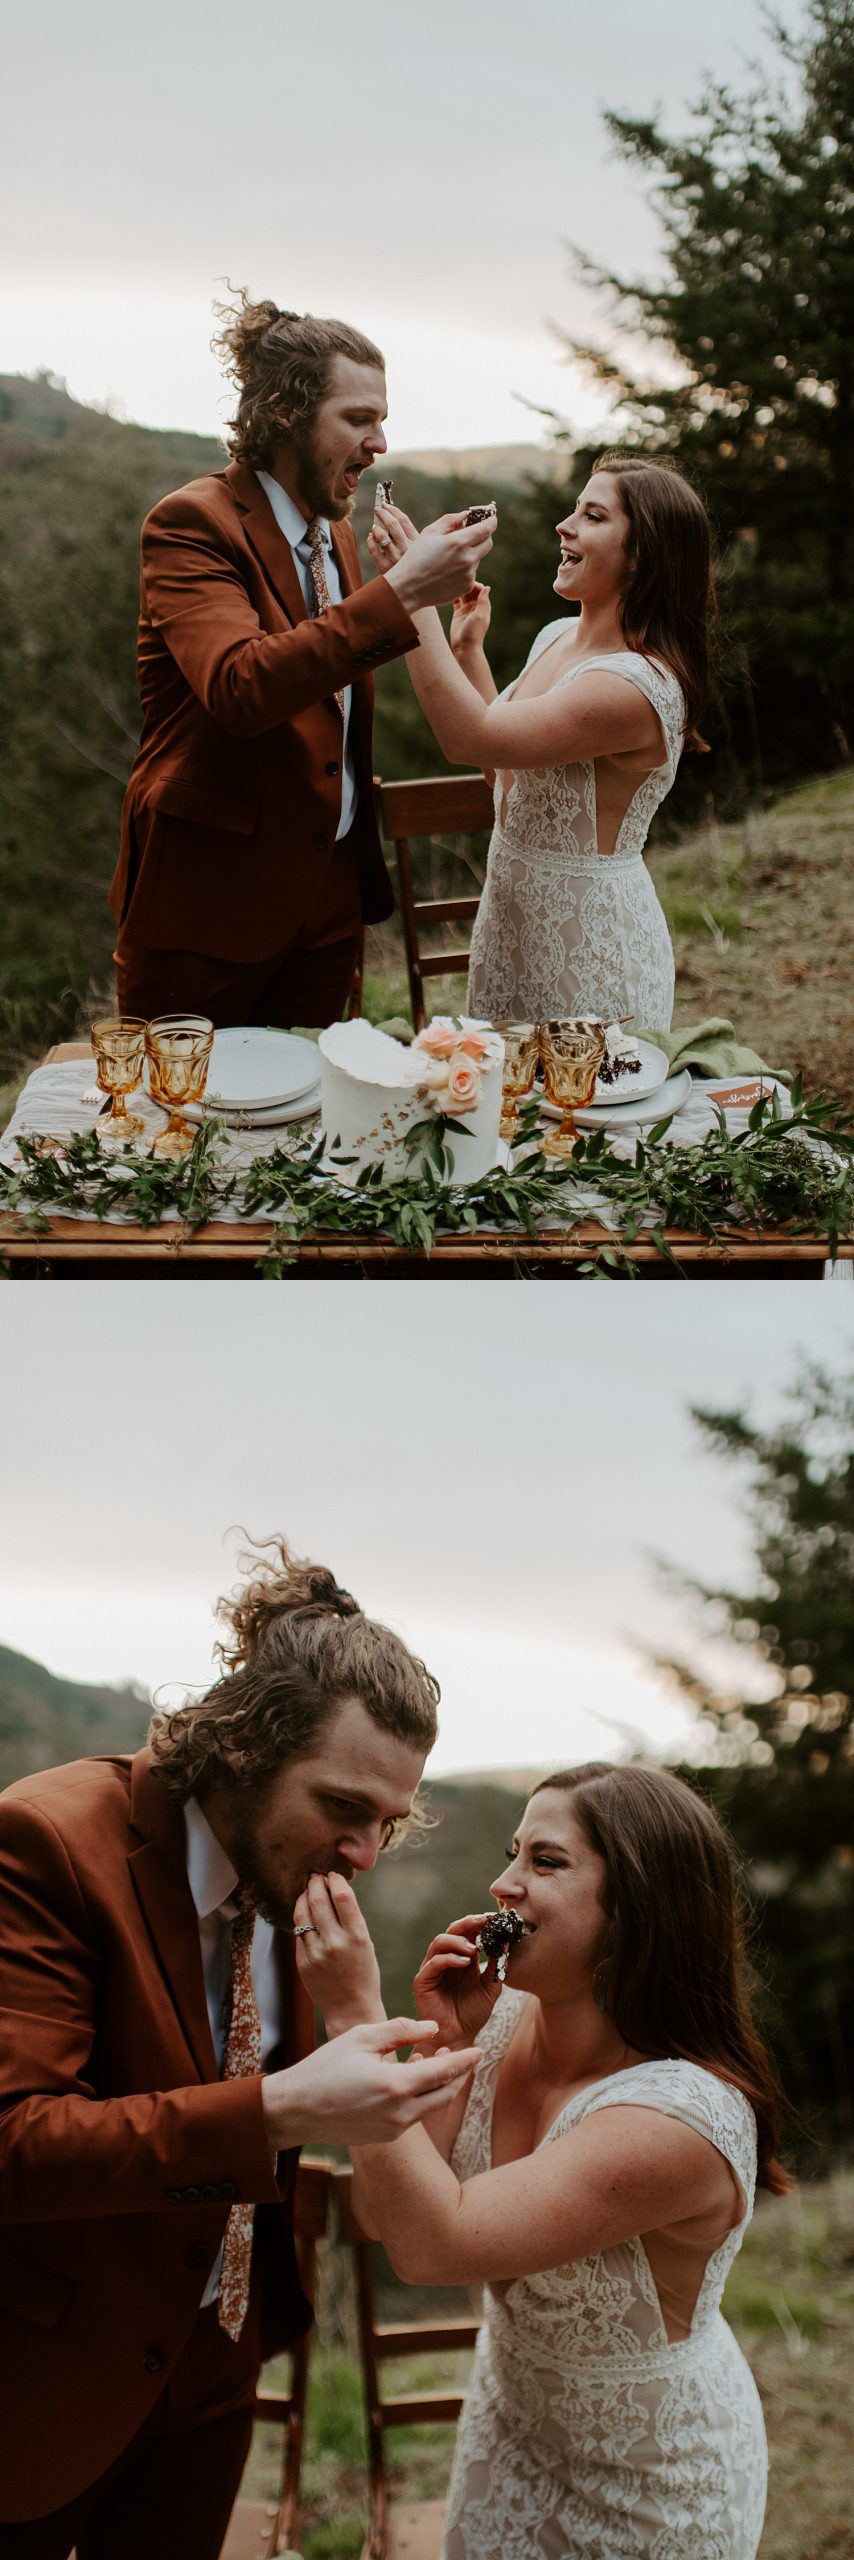 Bride and groom feeding each other cake in front of a small forest and earthy-toned tablescape with a view of a valley behind them.